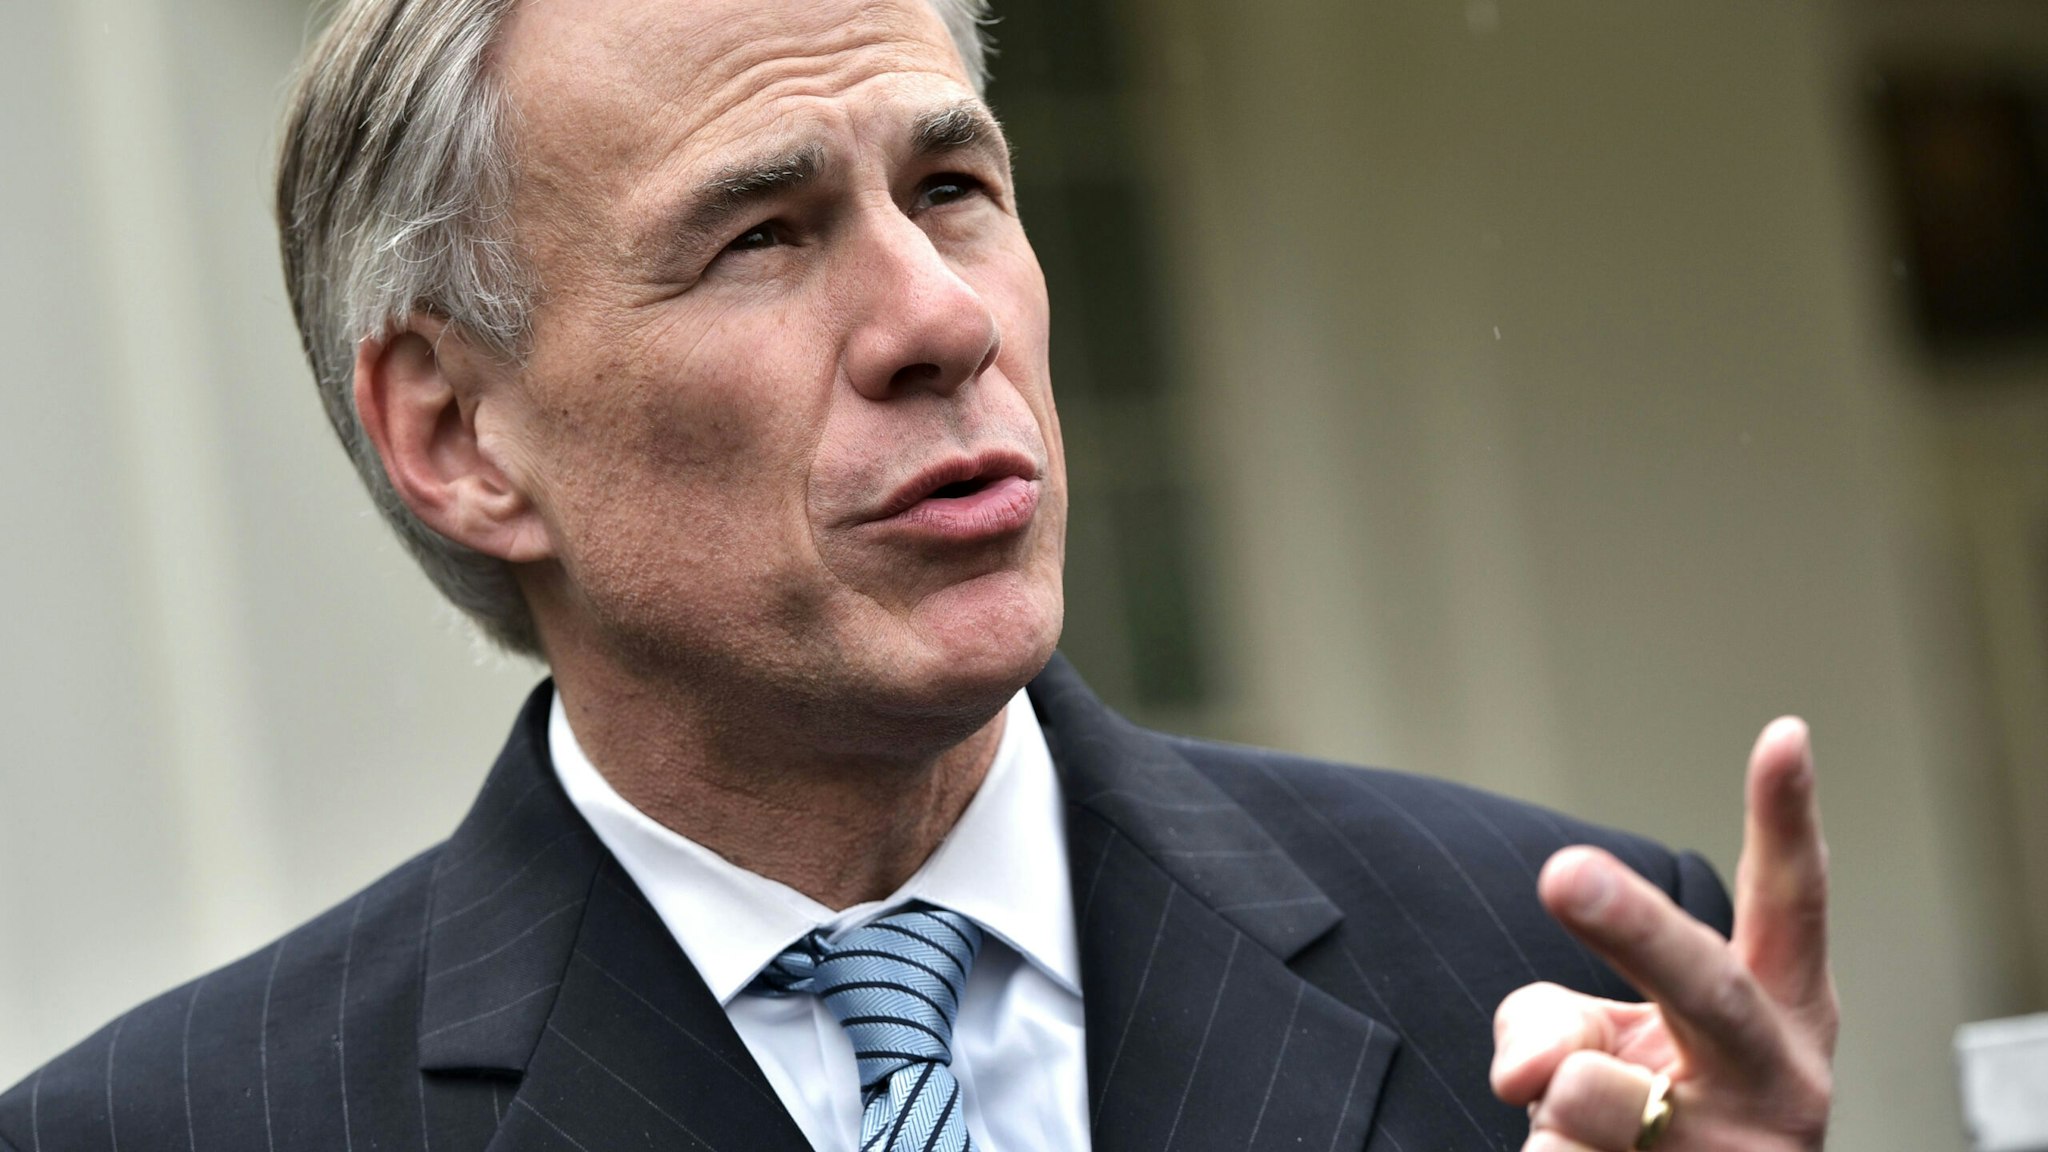 Texas Governor Greg Abbott speaks to reporters outside of the West Wing of the White House after meeting US President Donald Trump on March 24, 2017 in Washington, DC.